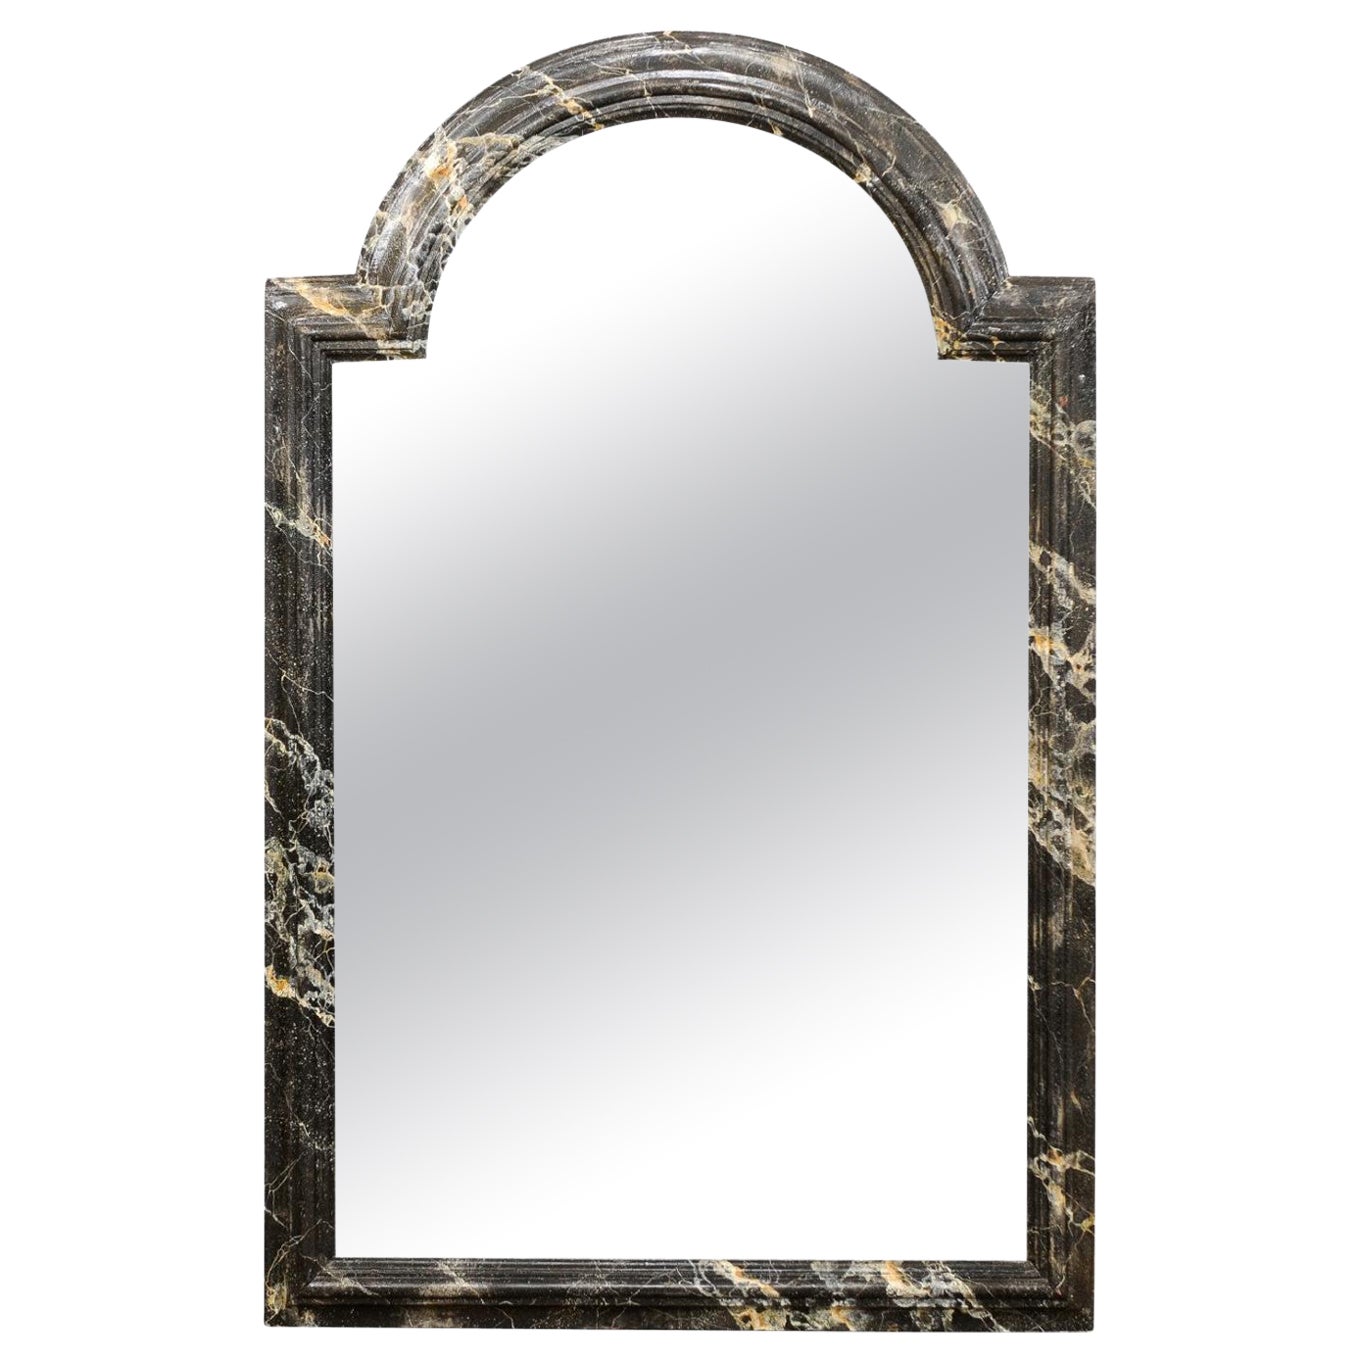 18th C. French Arch Crested Mirror w/Faux-Marbled Wood Surround